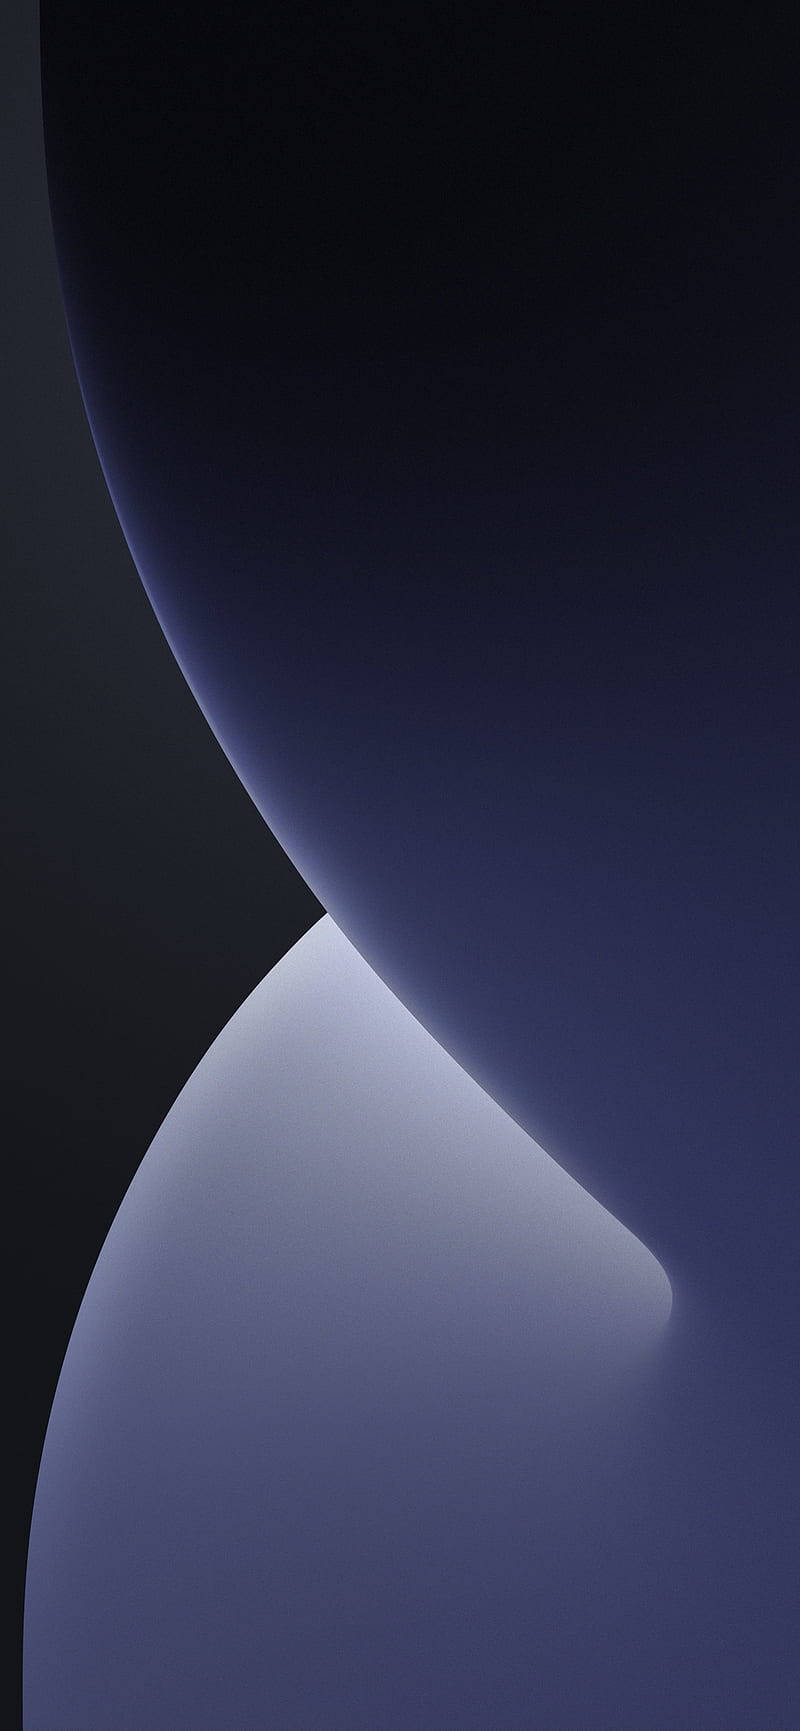 Curvy Shapes Iphone Ios 10 Background